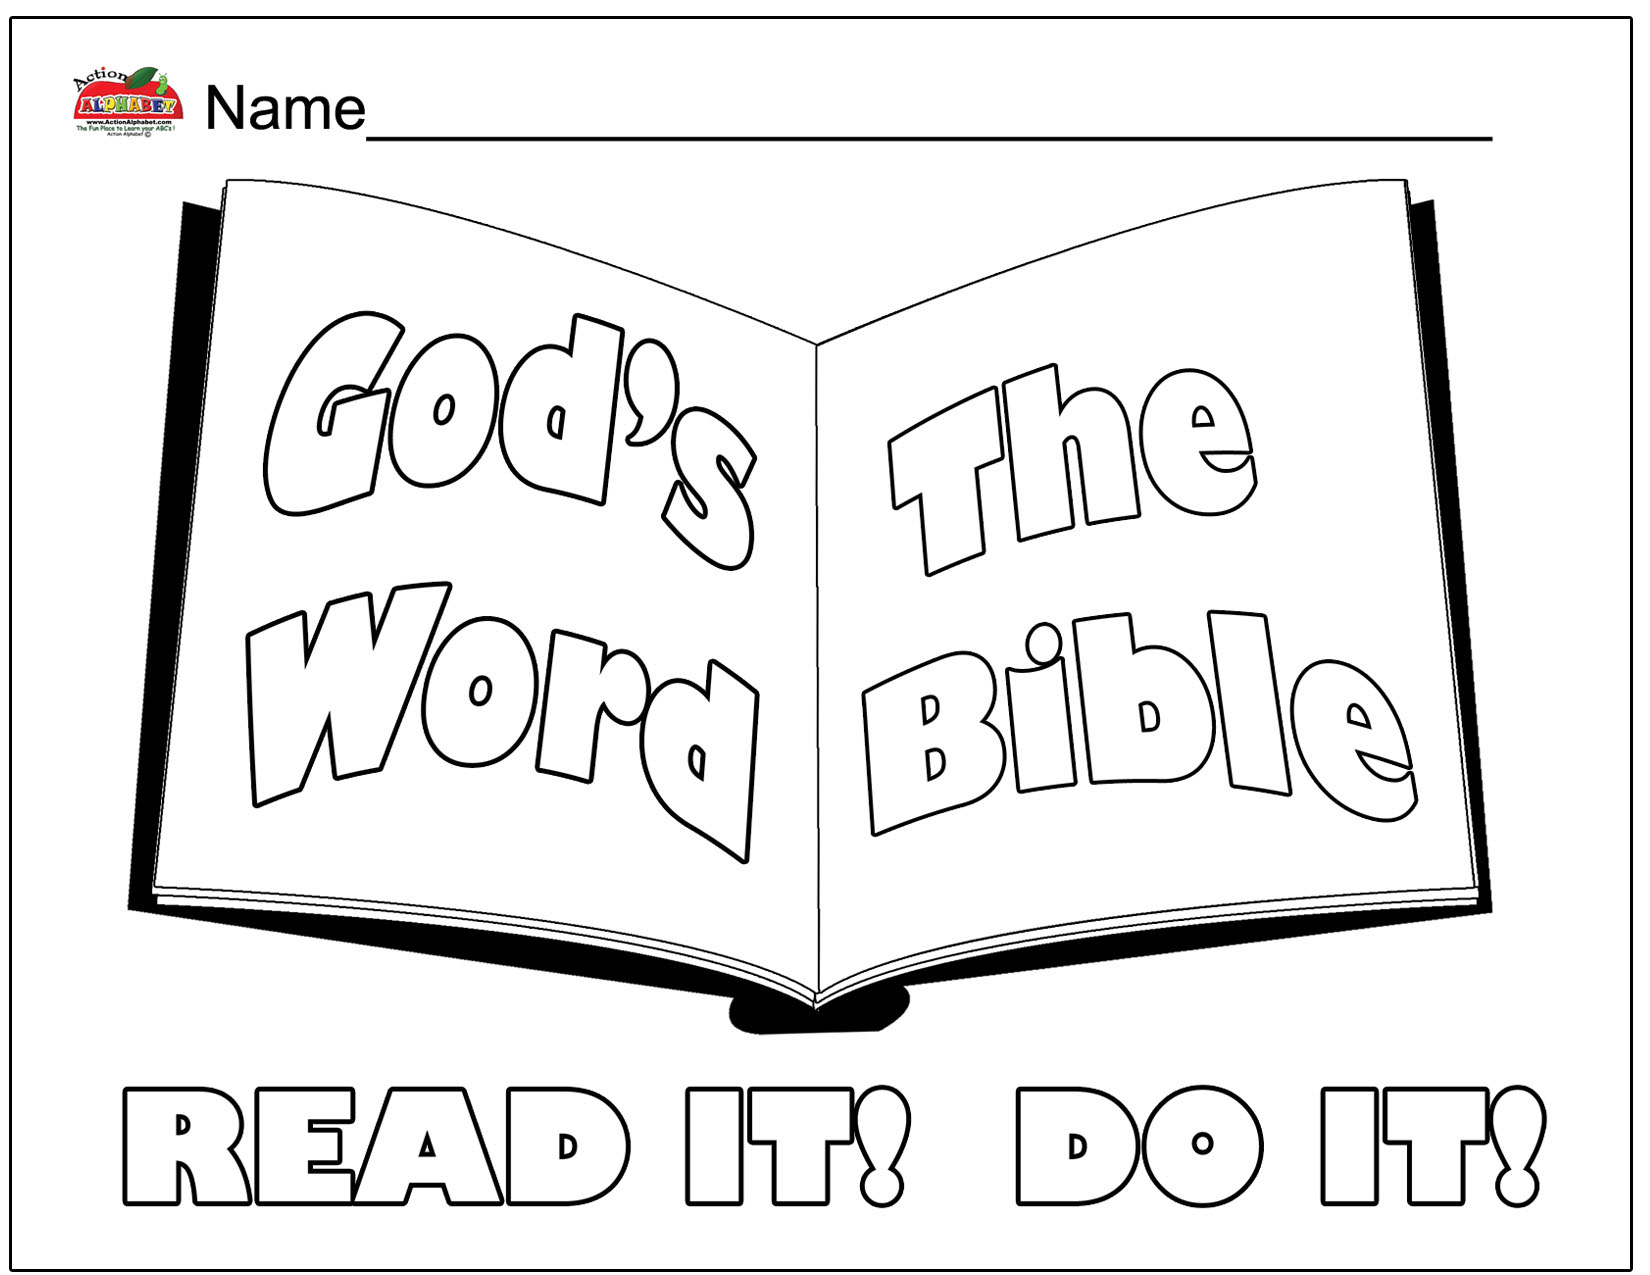 Printable Bible Coloring Pages | ColoringMe.com